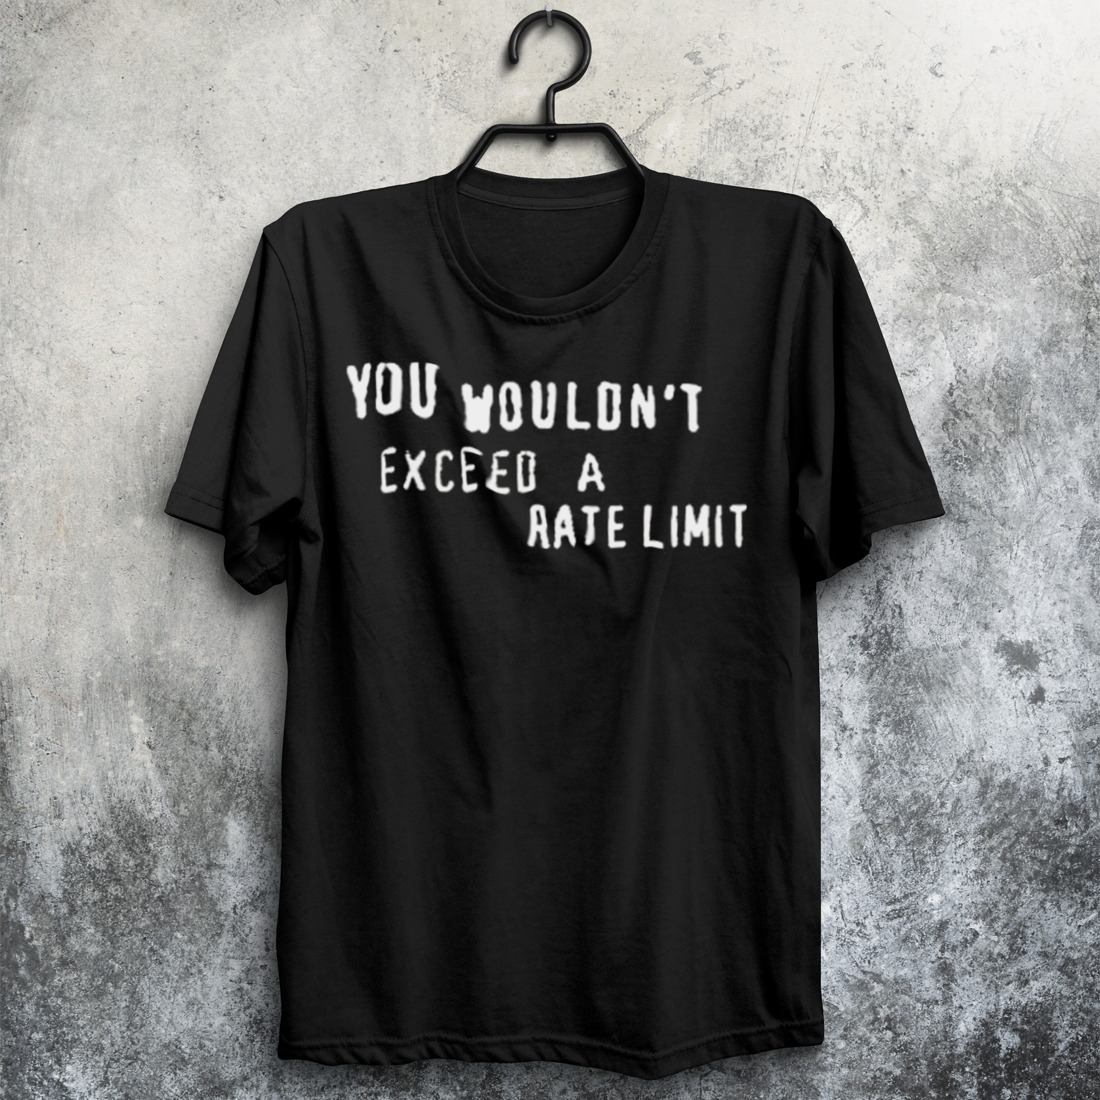 You Wouldn’t Exceed A Rate Limit Shirt